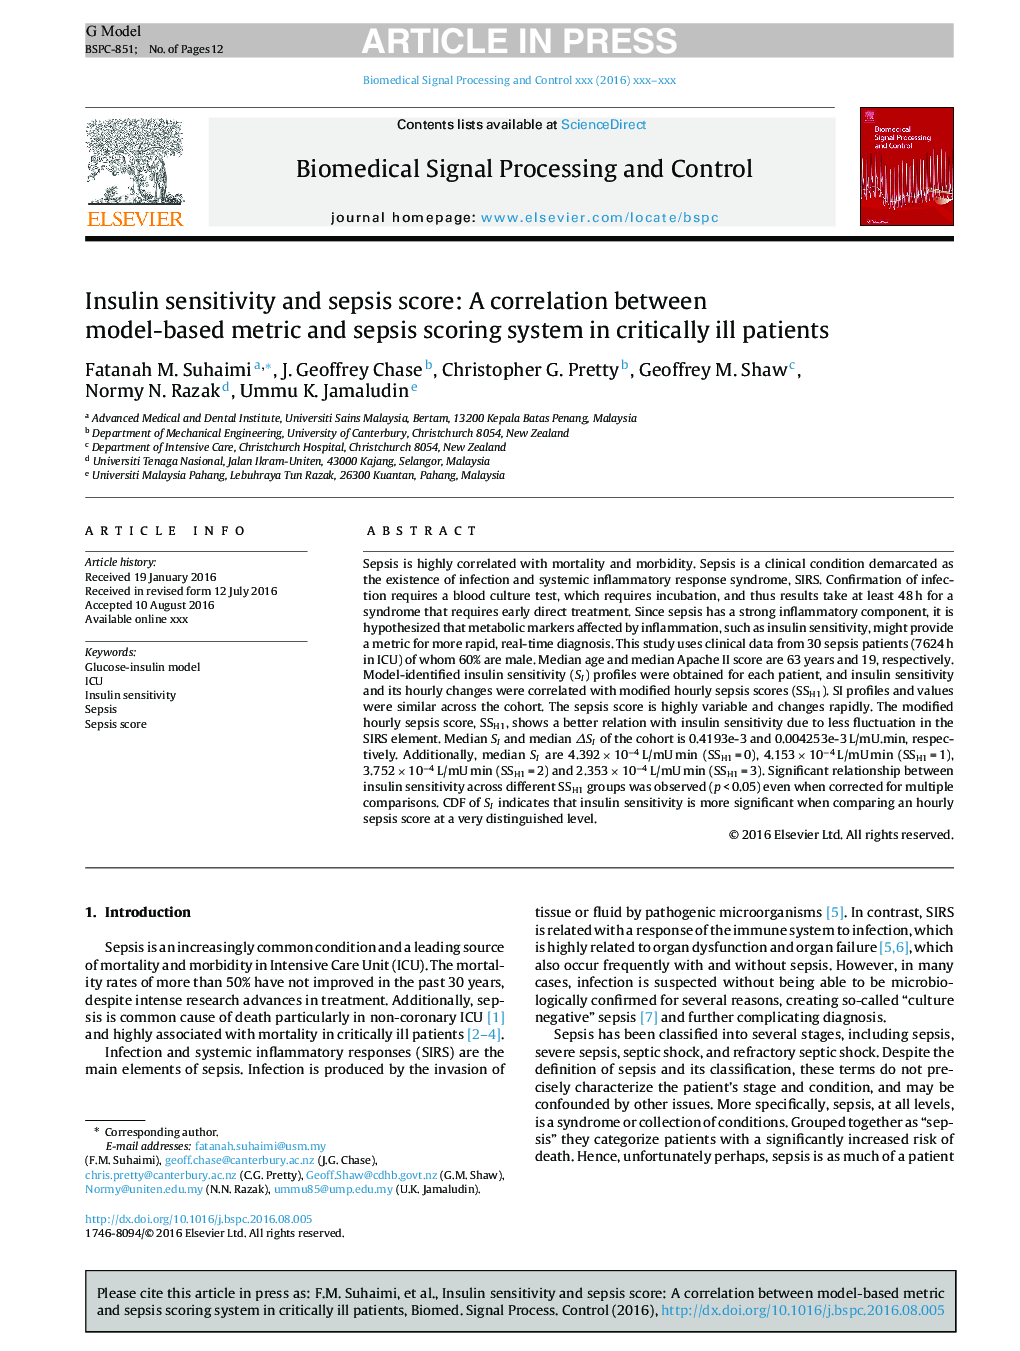 Insulin sensitivity and sepsis score: A correlation between model-based metric and sepsis scoring system in critically ill patients